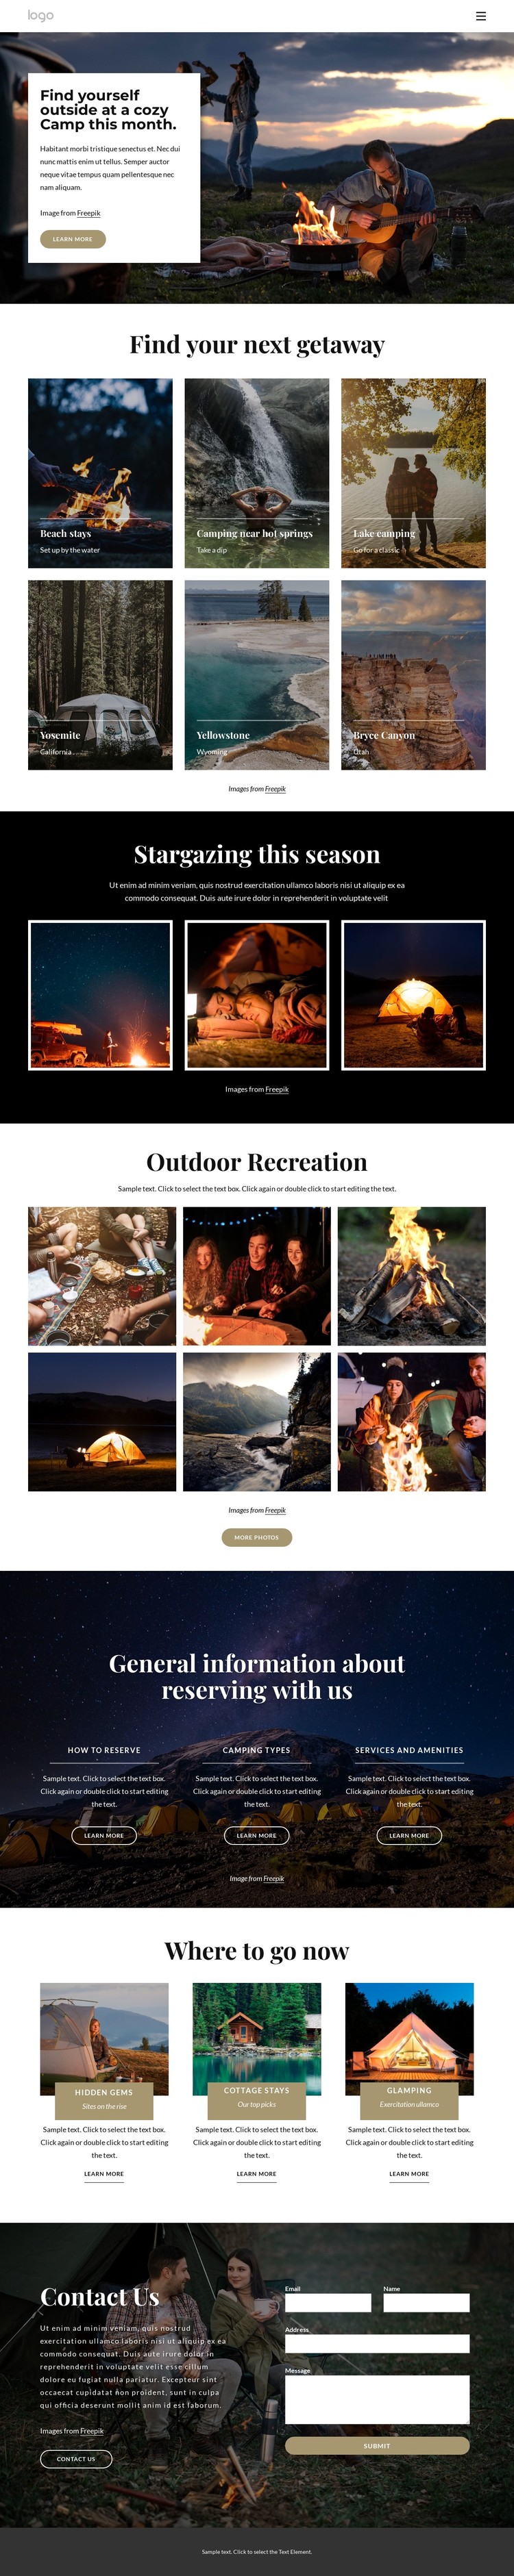 Going on a camping trip CSS Template